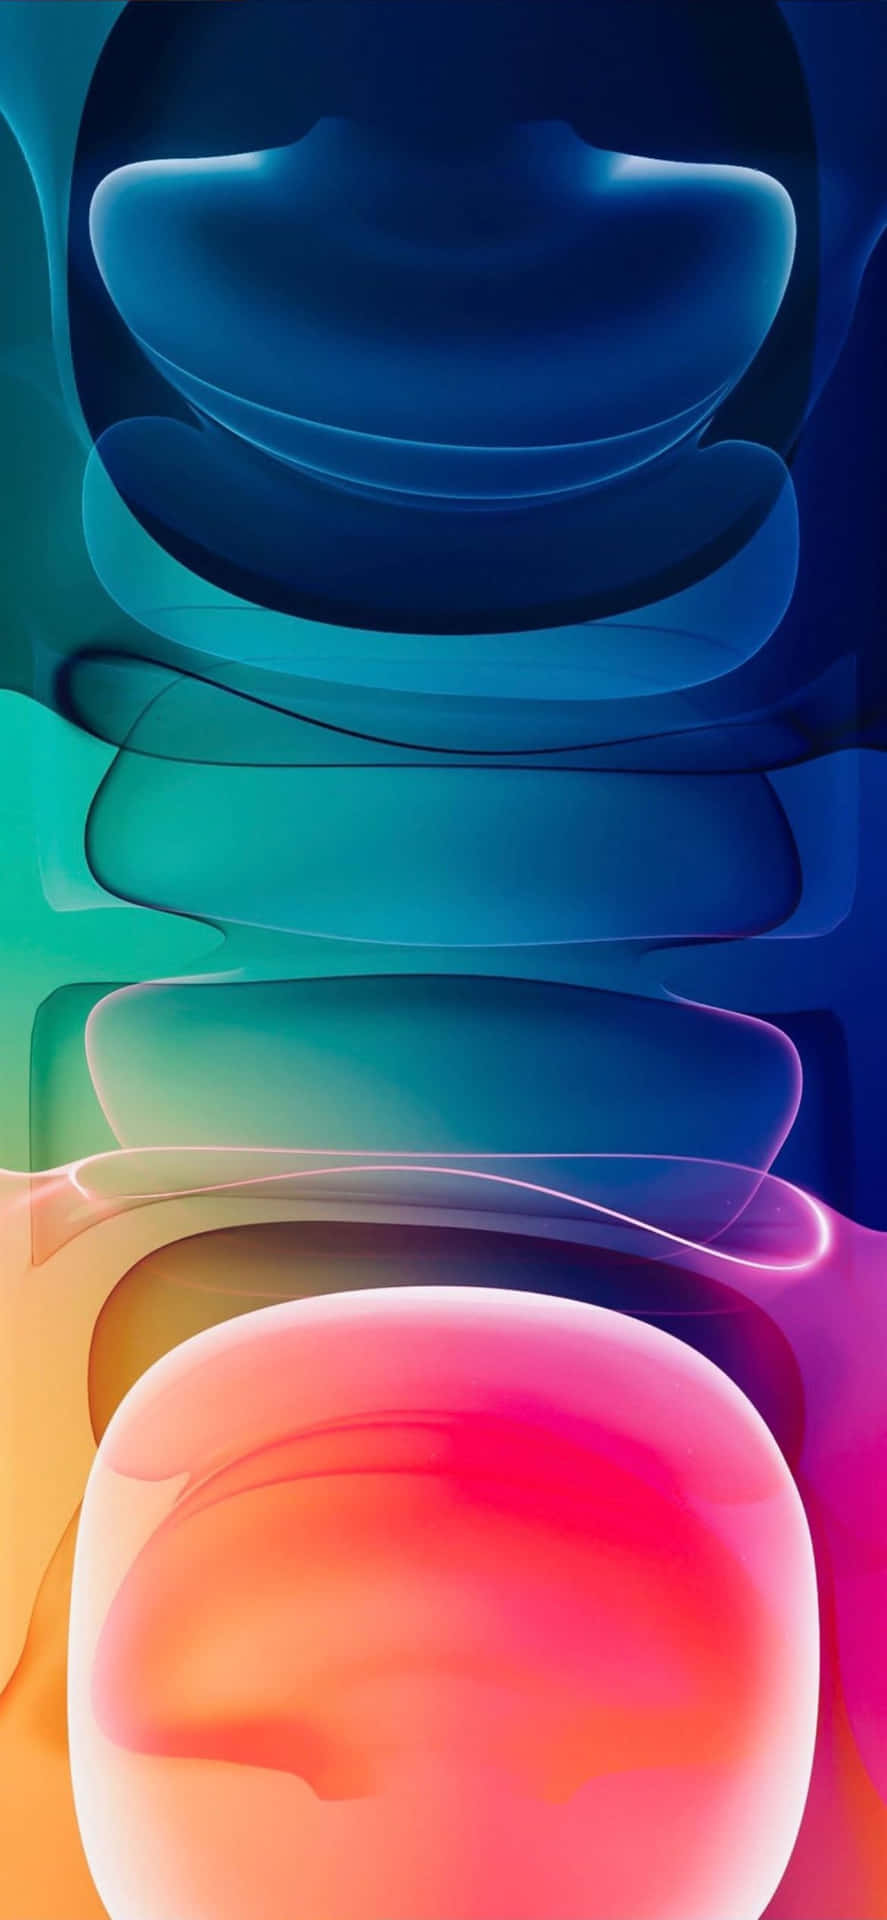 Iphone 12 Pro Max Background